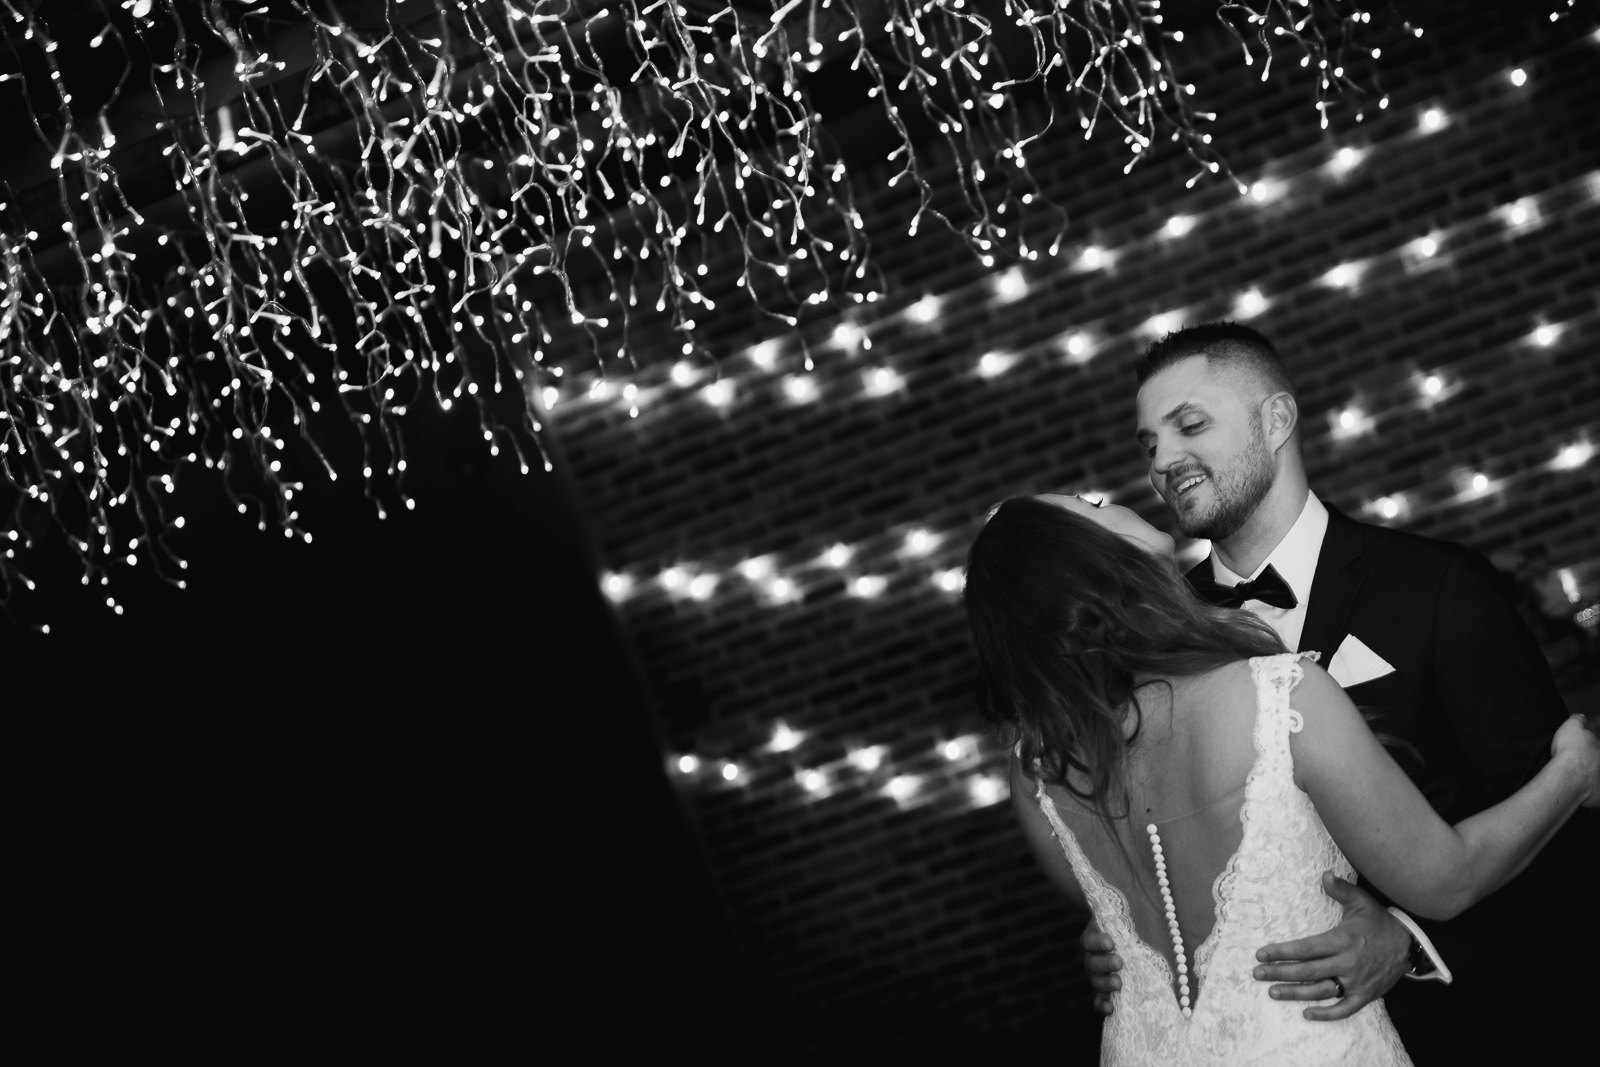 Bride and groom first dance, romantic, wedding reception at Gather at the Lakes